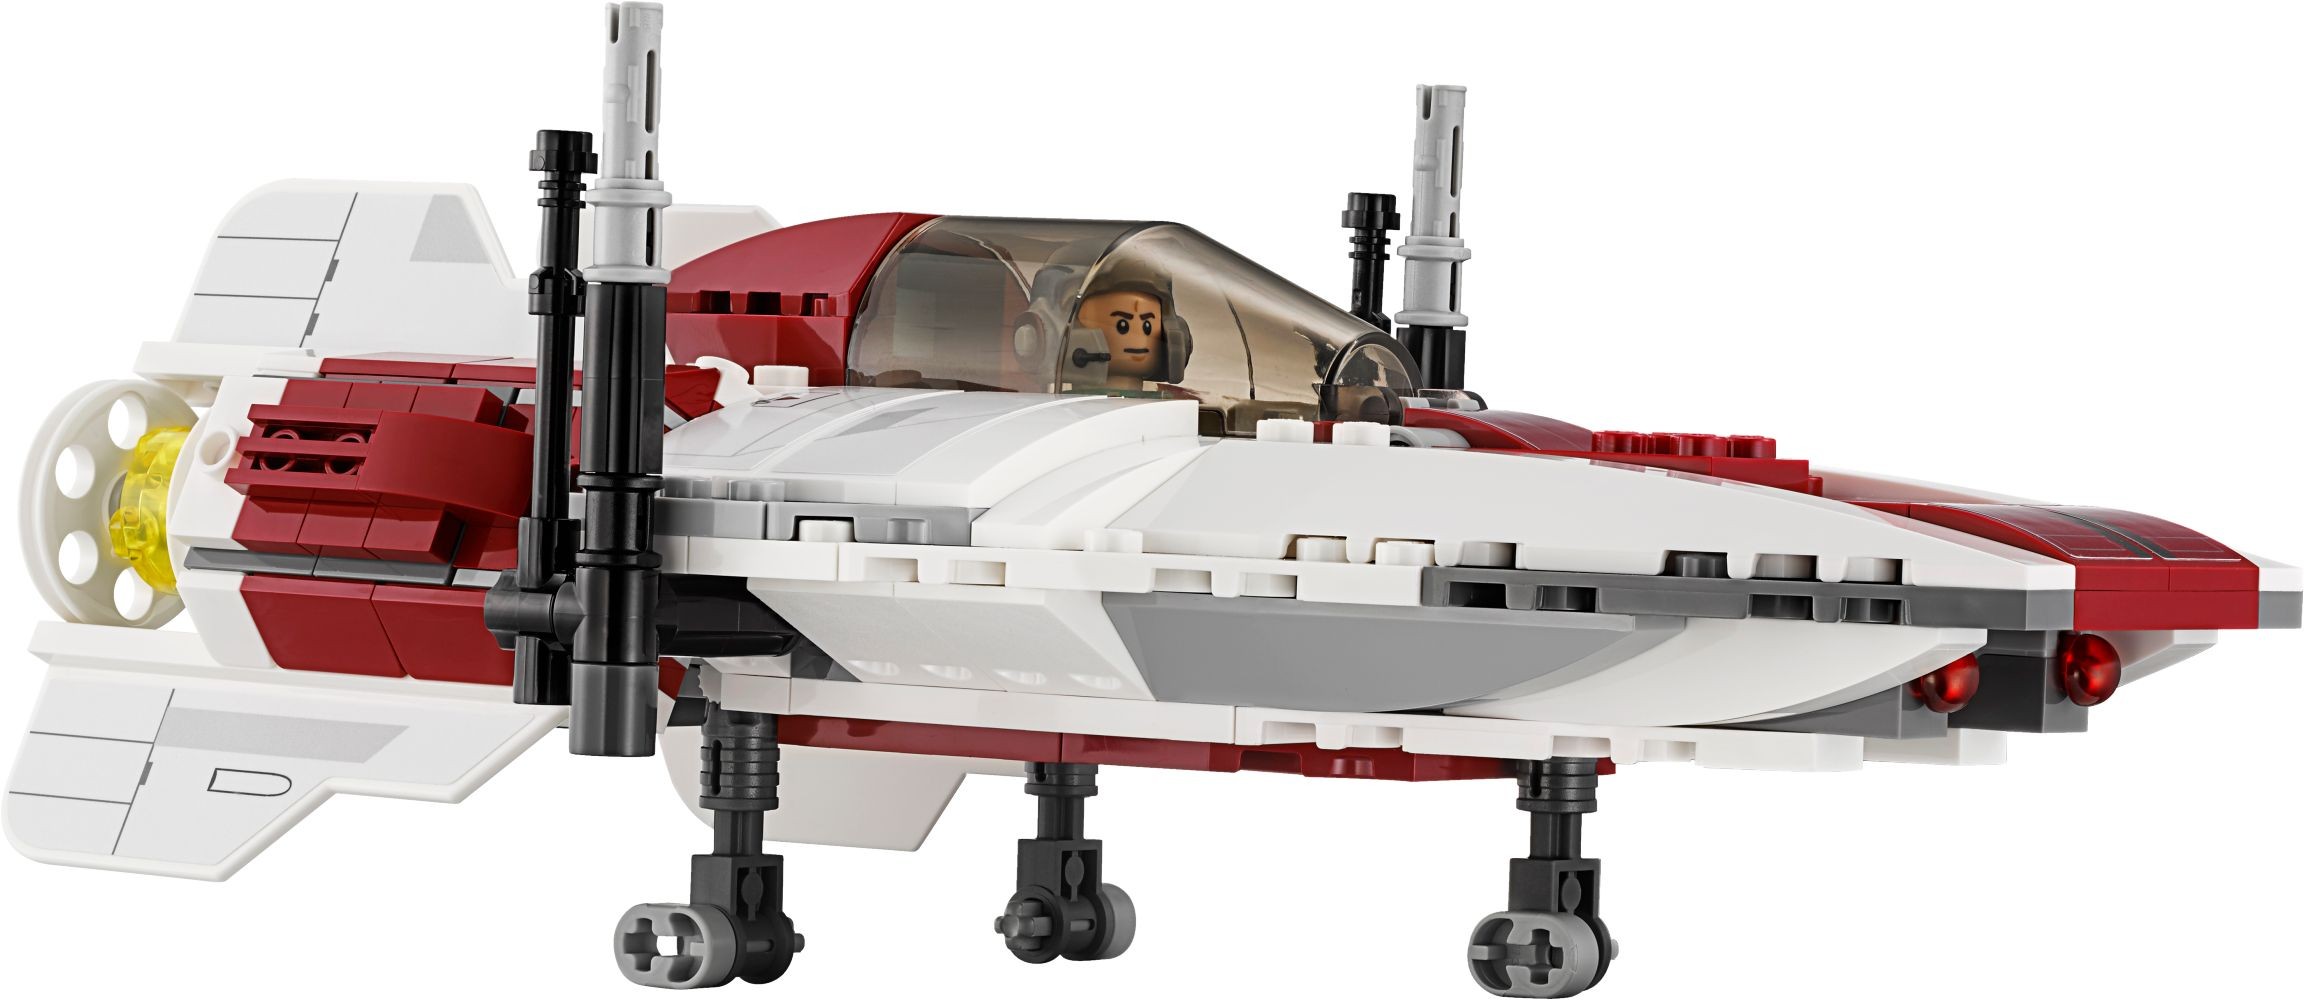 Lego 75175 A-wing Starfighter - Star Wars set for sale best